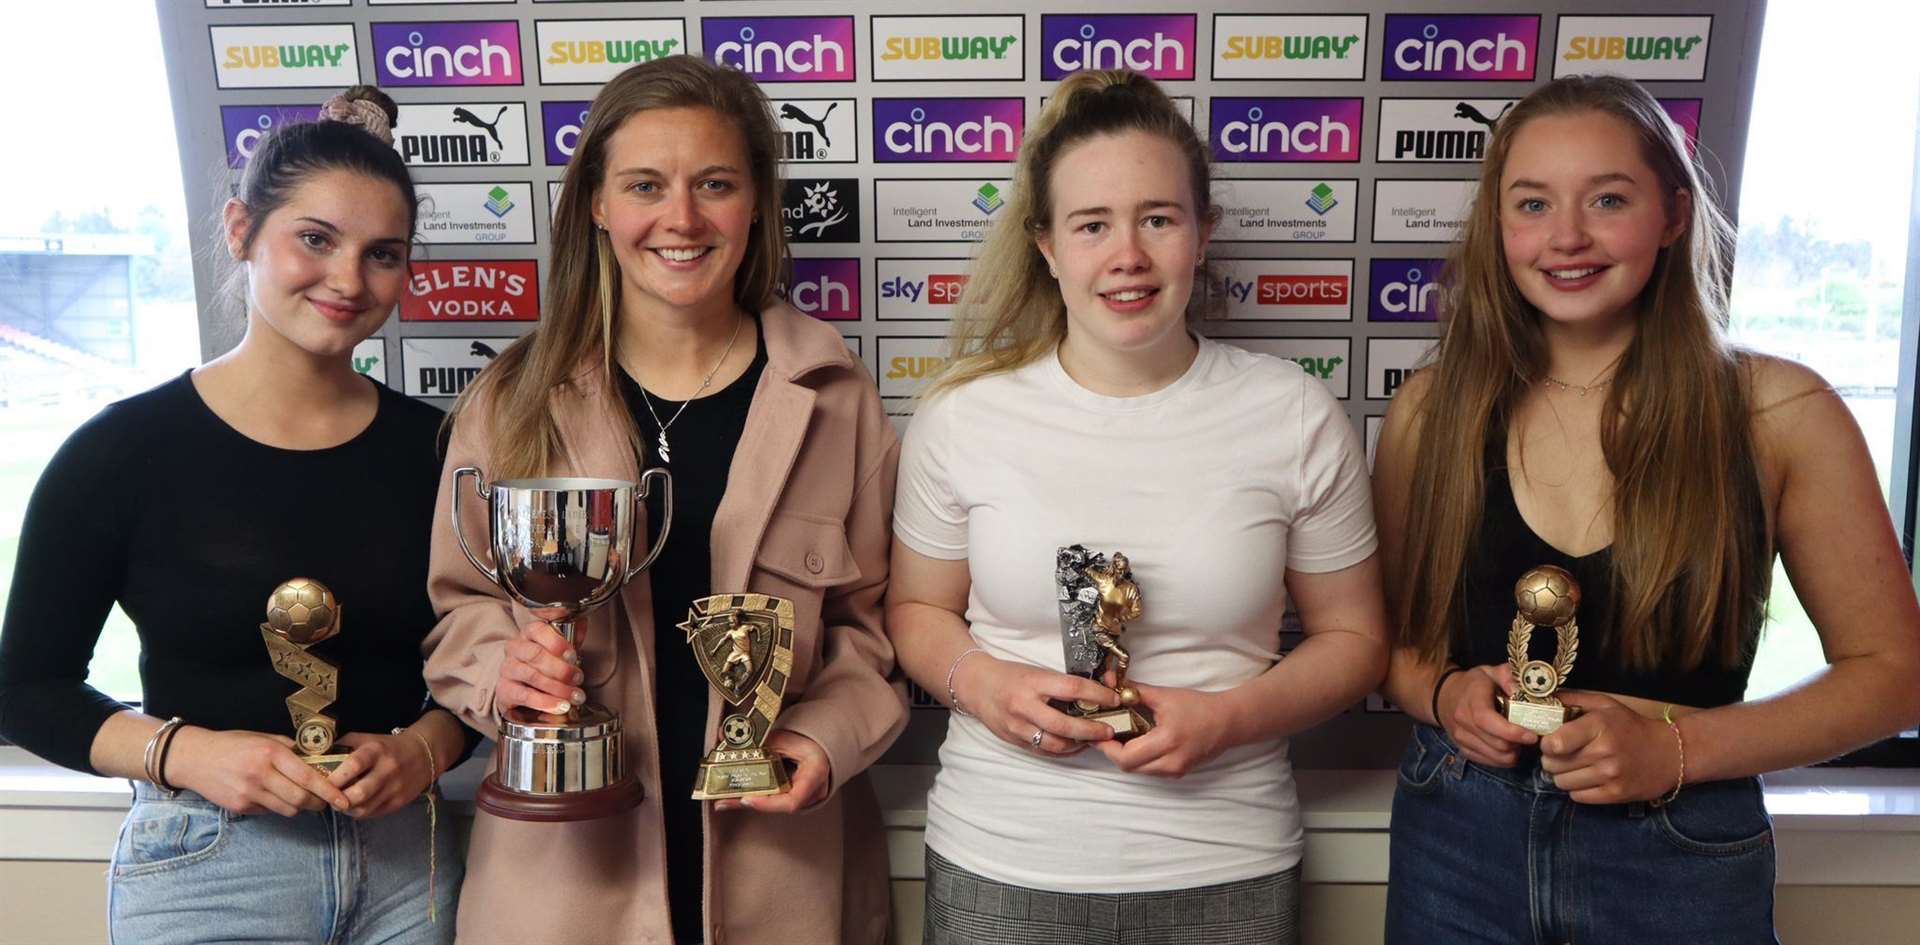 Inverness Caledonian Thistle's women's team presented their end of season awards after their final match against Westdyke at the Caledonian Stadium.